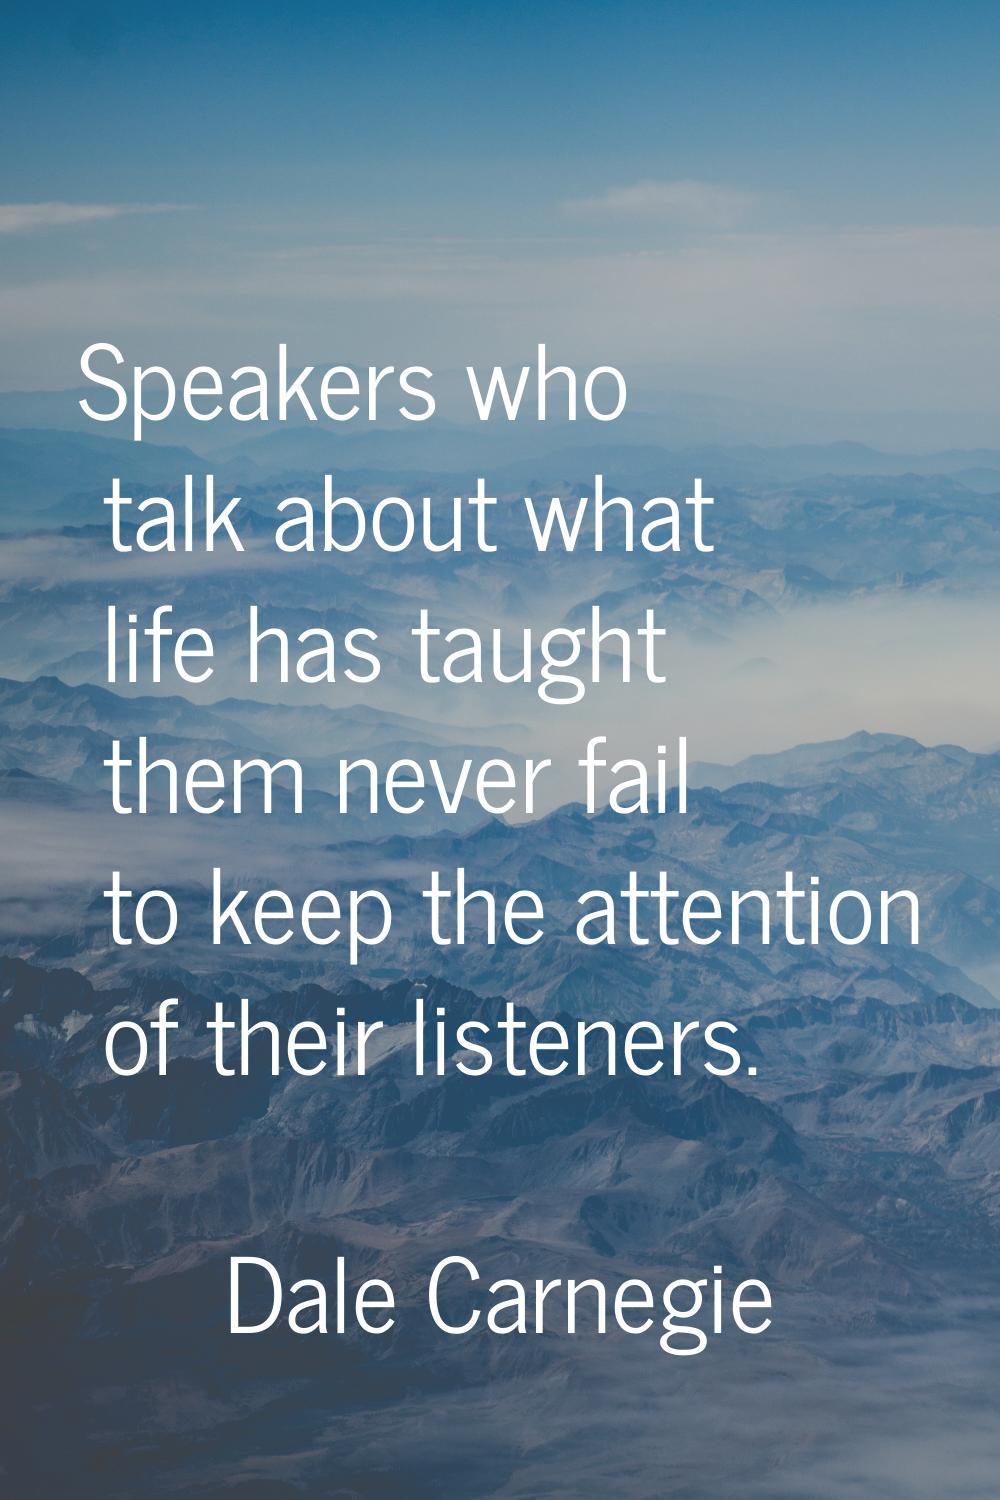 Speakers who talk about what life has taught them never fail to keep the attention of their listene